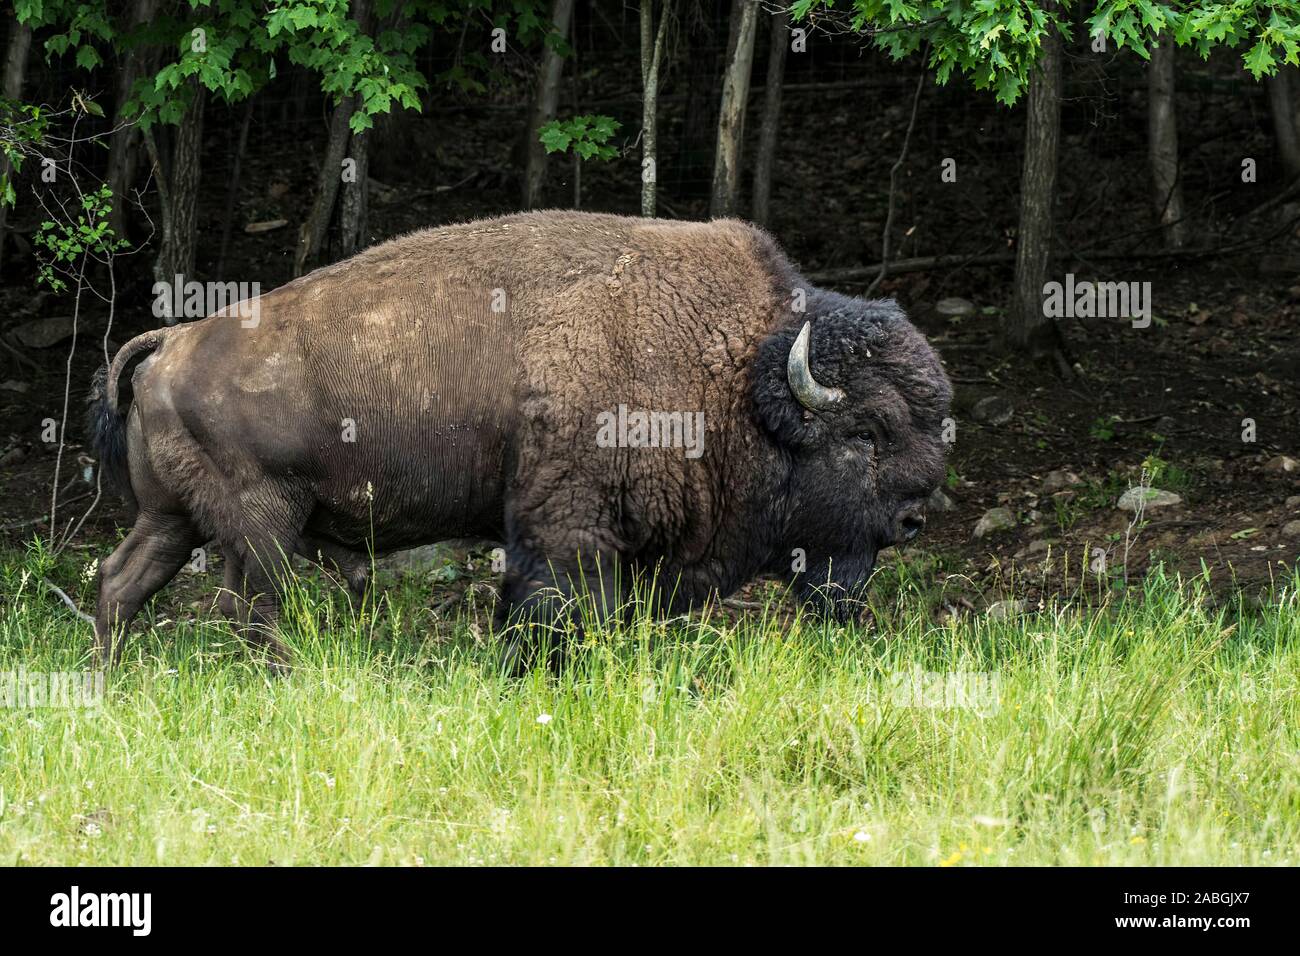 A big male Bison, in the grass by the forest edge. Stock Photo